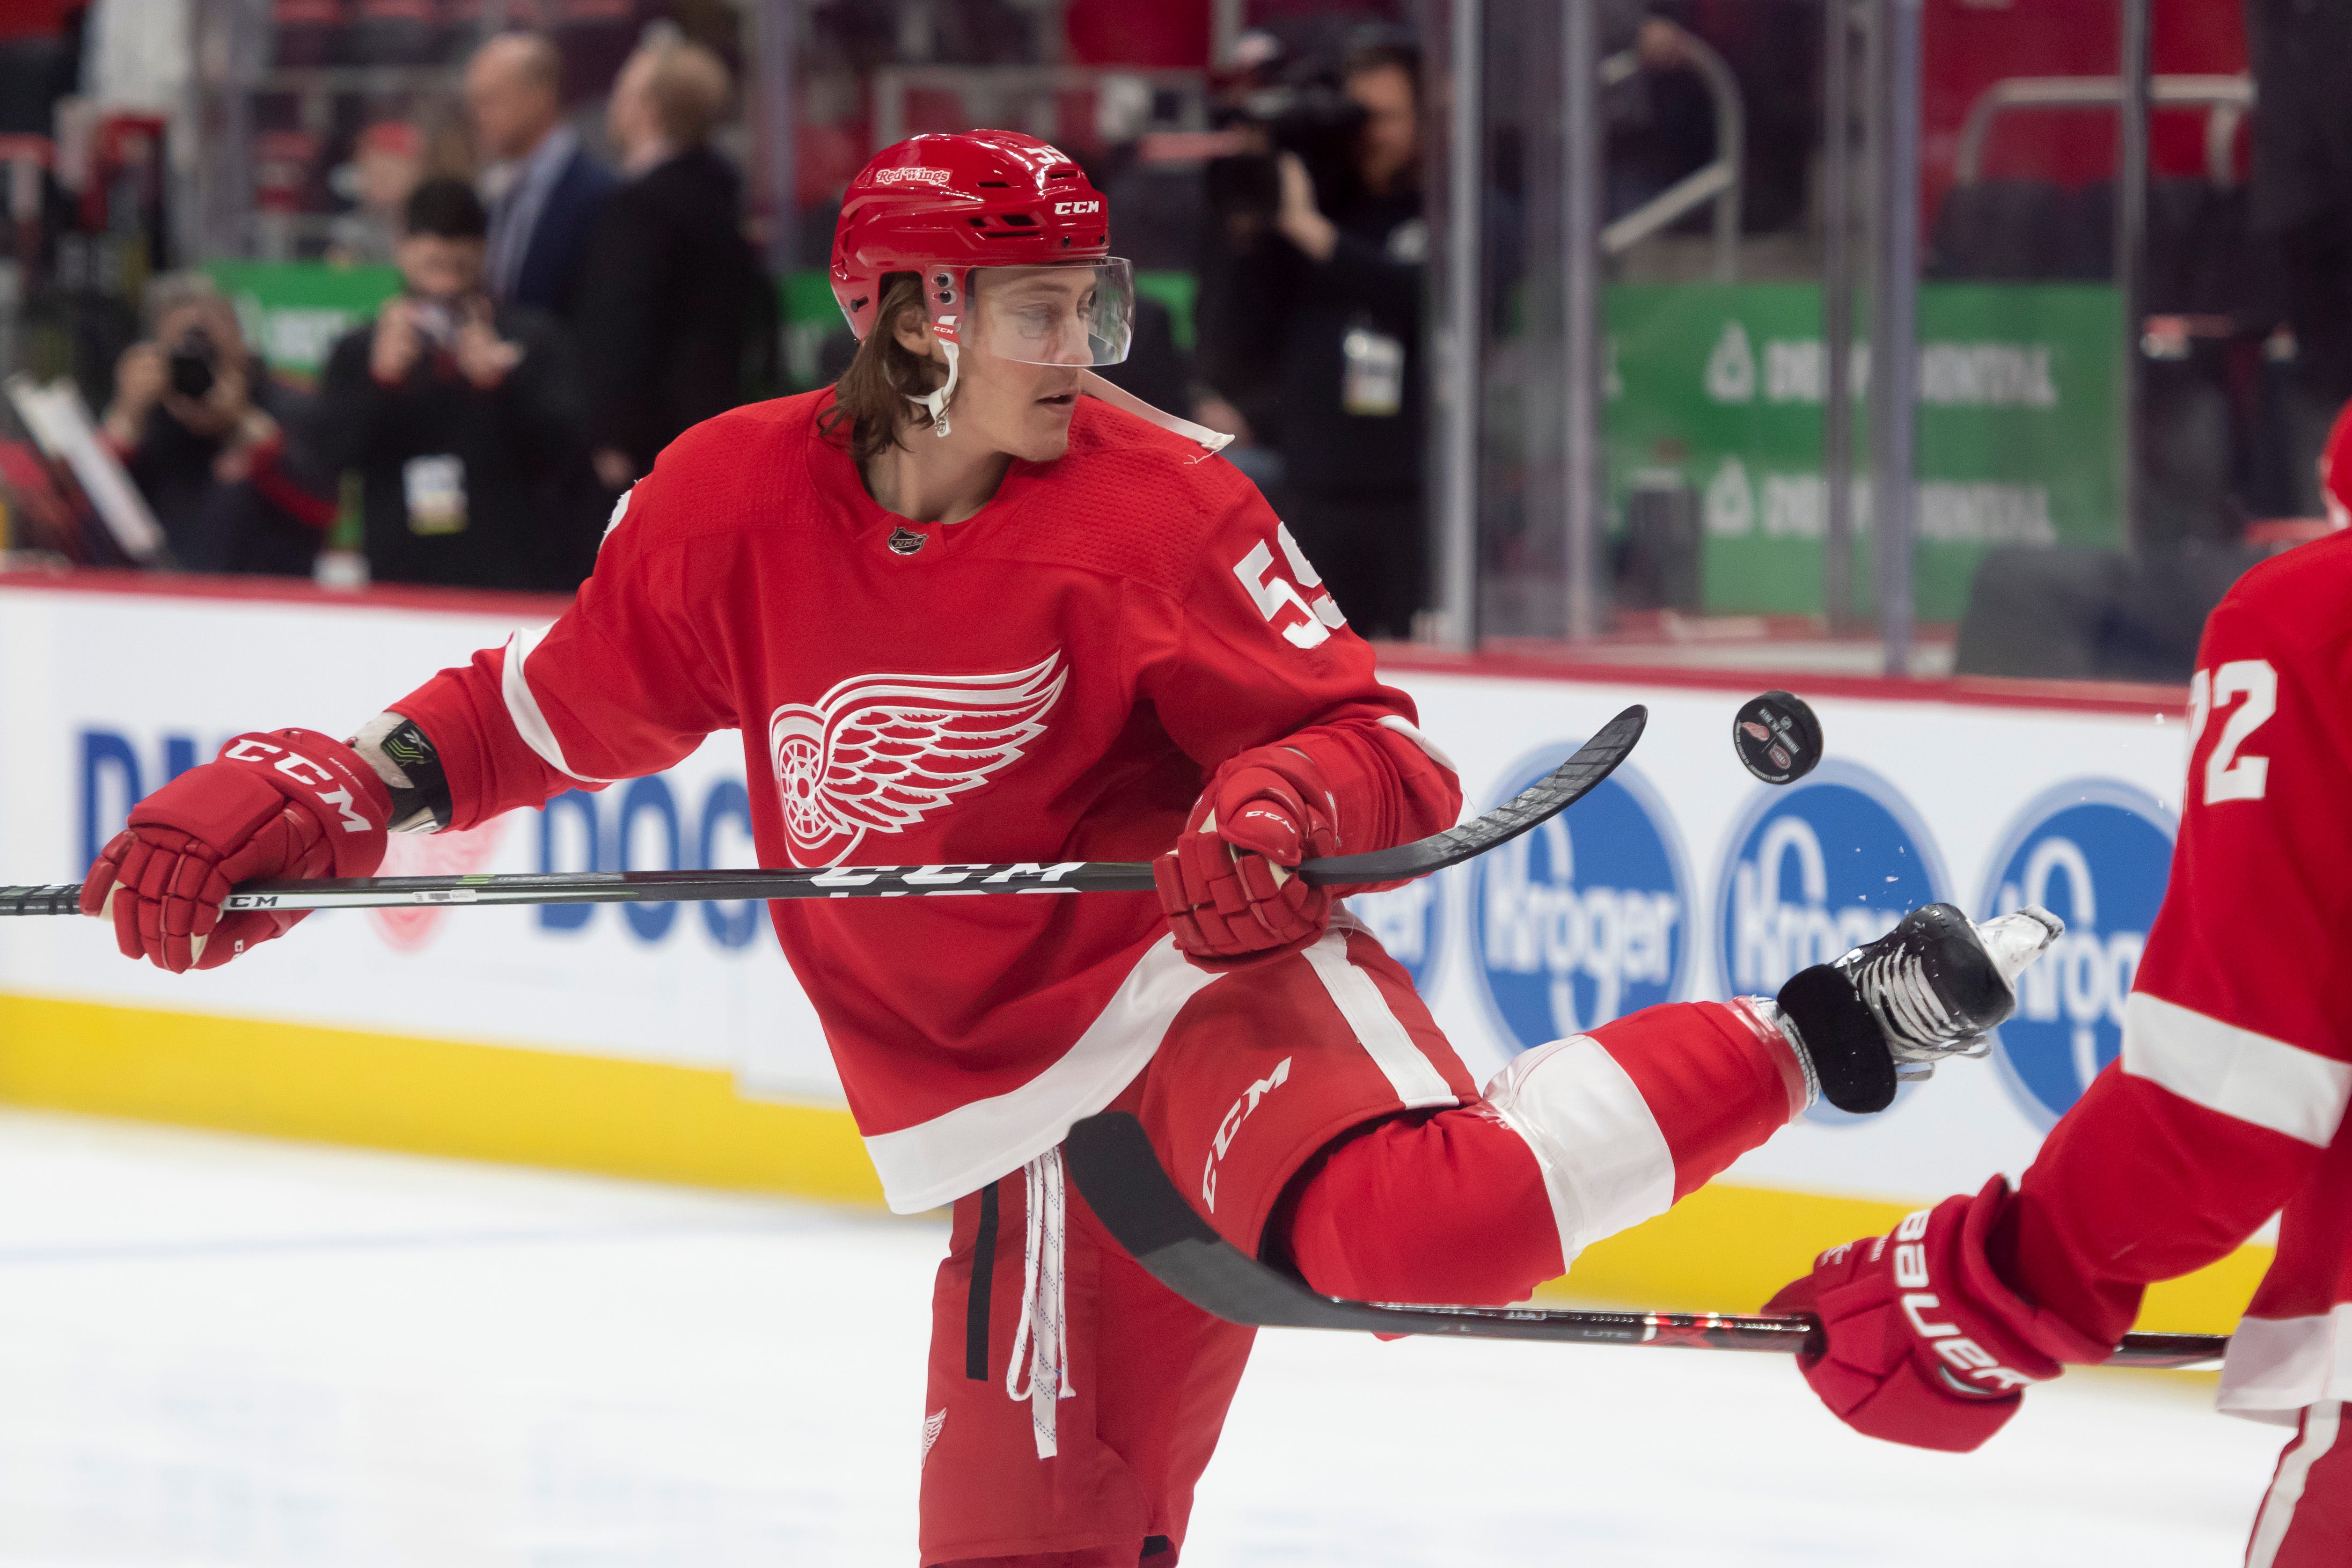 4. Tyler Bertuzzi, left wing. Bertuzzi isn’t the most fluid player on the ice, but his value comes from his ability to play up and down the lineup, in a variety of roles, and produce in whatever way he’s used. Bertuzzi found a home playing with Larkin and Anthony Mantha late in the season, producing offensively at a historic clip (four consecutive games with at least three points). He’s a hockey player, through and through.